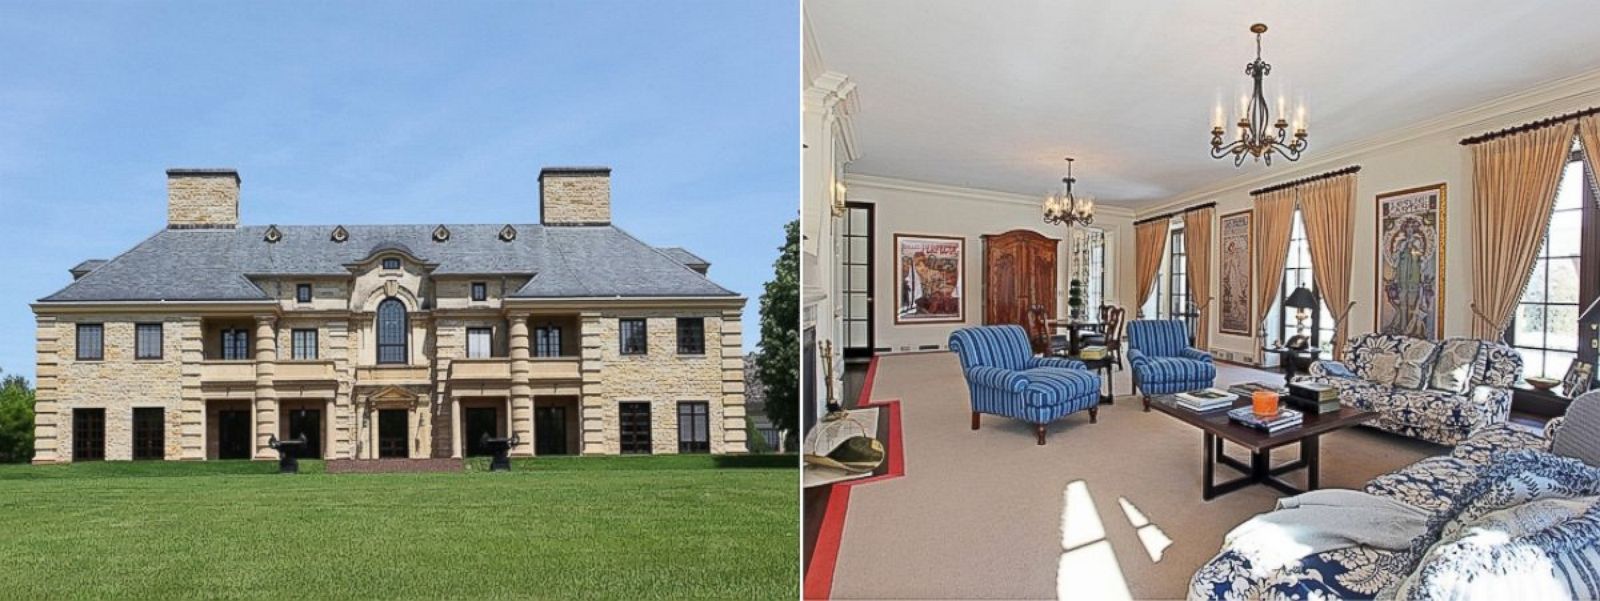 For Sale: Luxury Homes On More Than 10 Acres Photos | Image #11 - ABC News